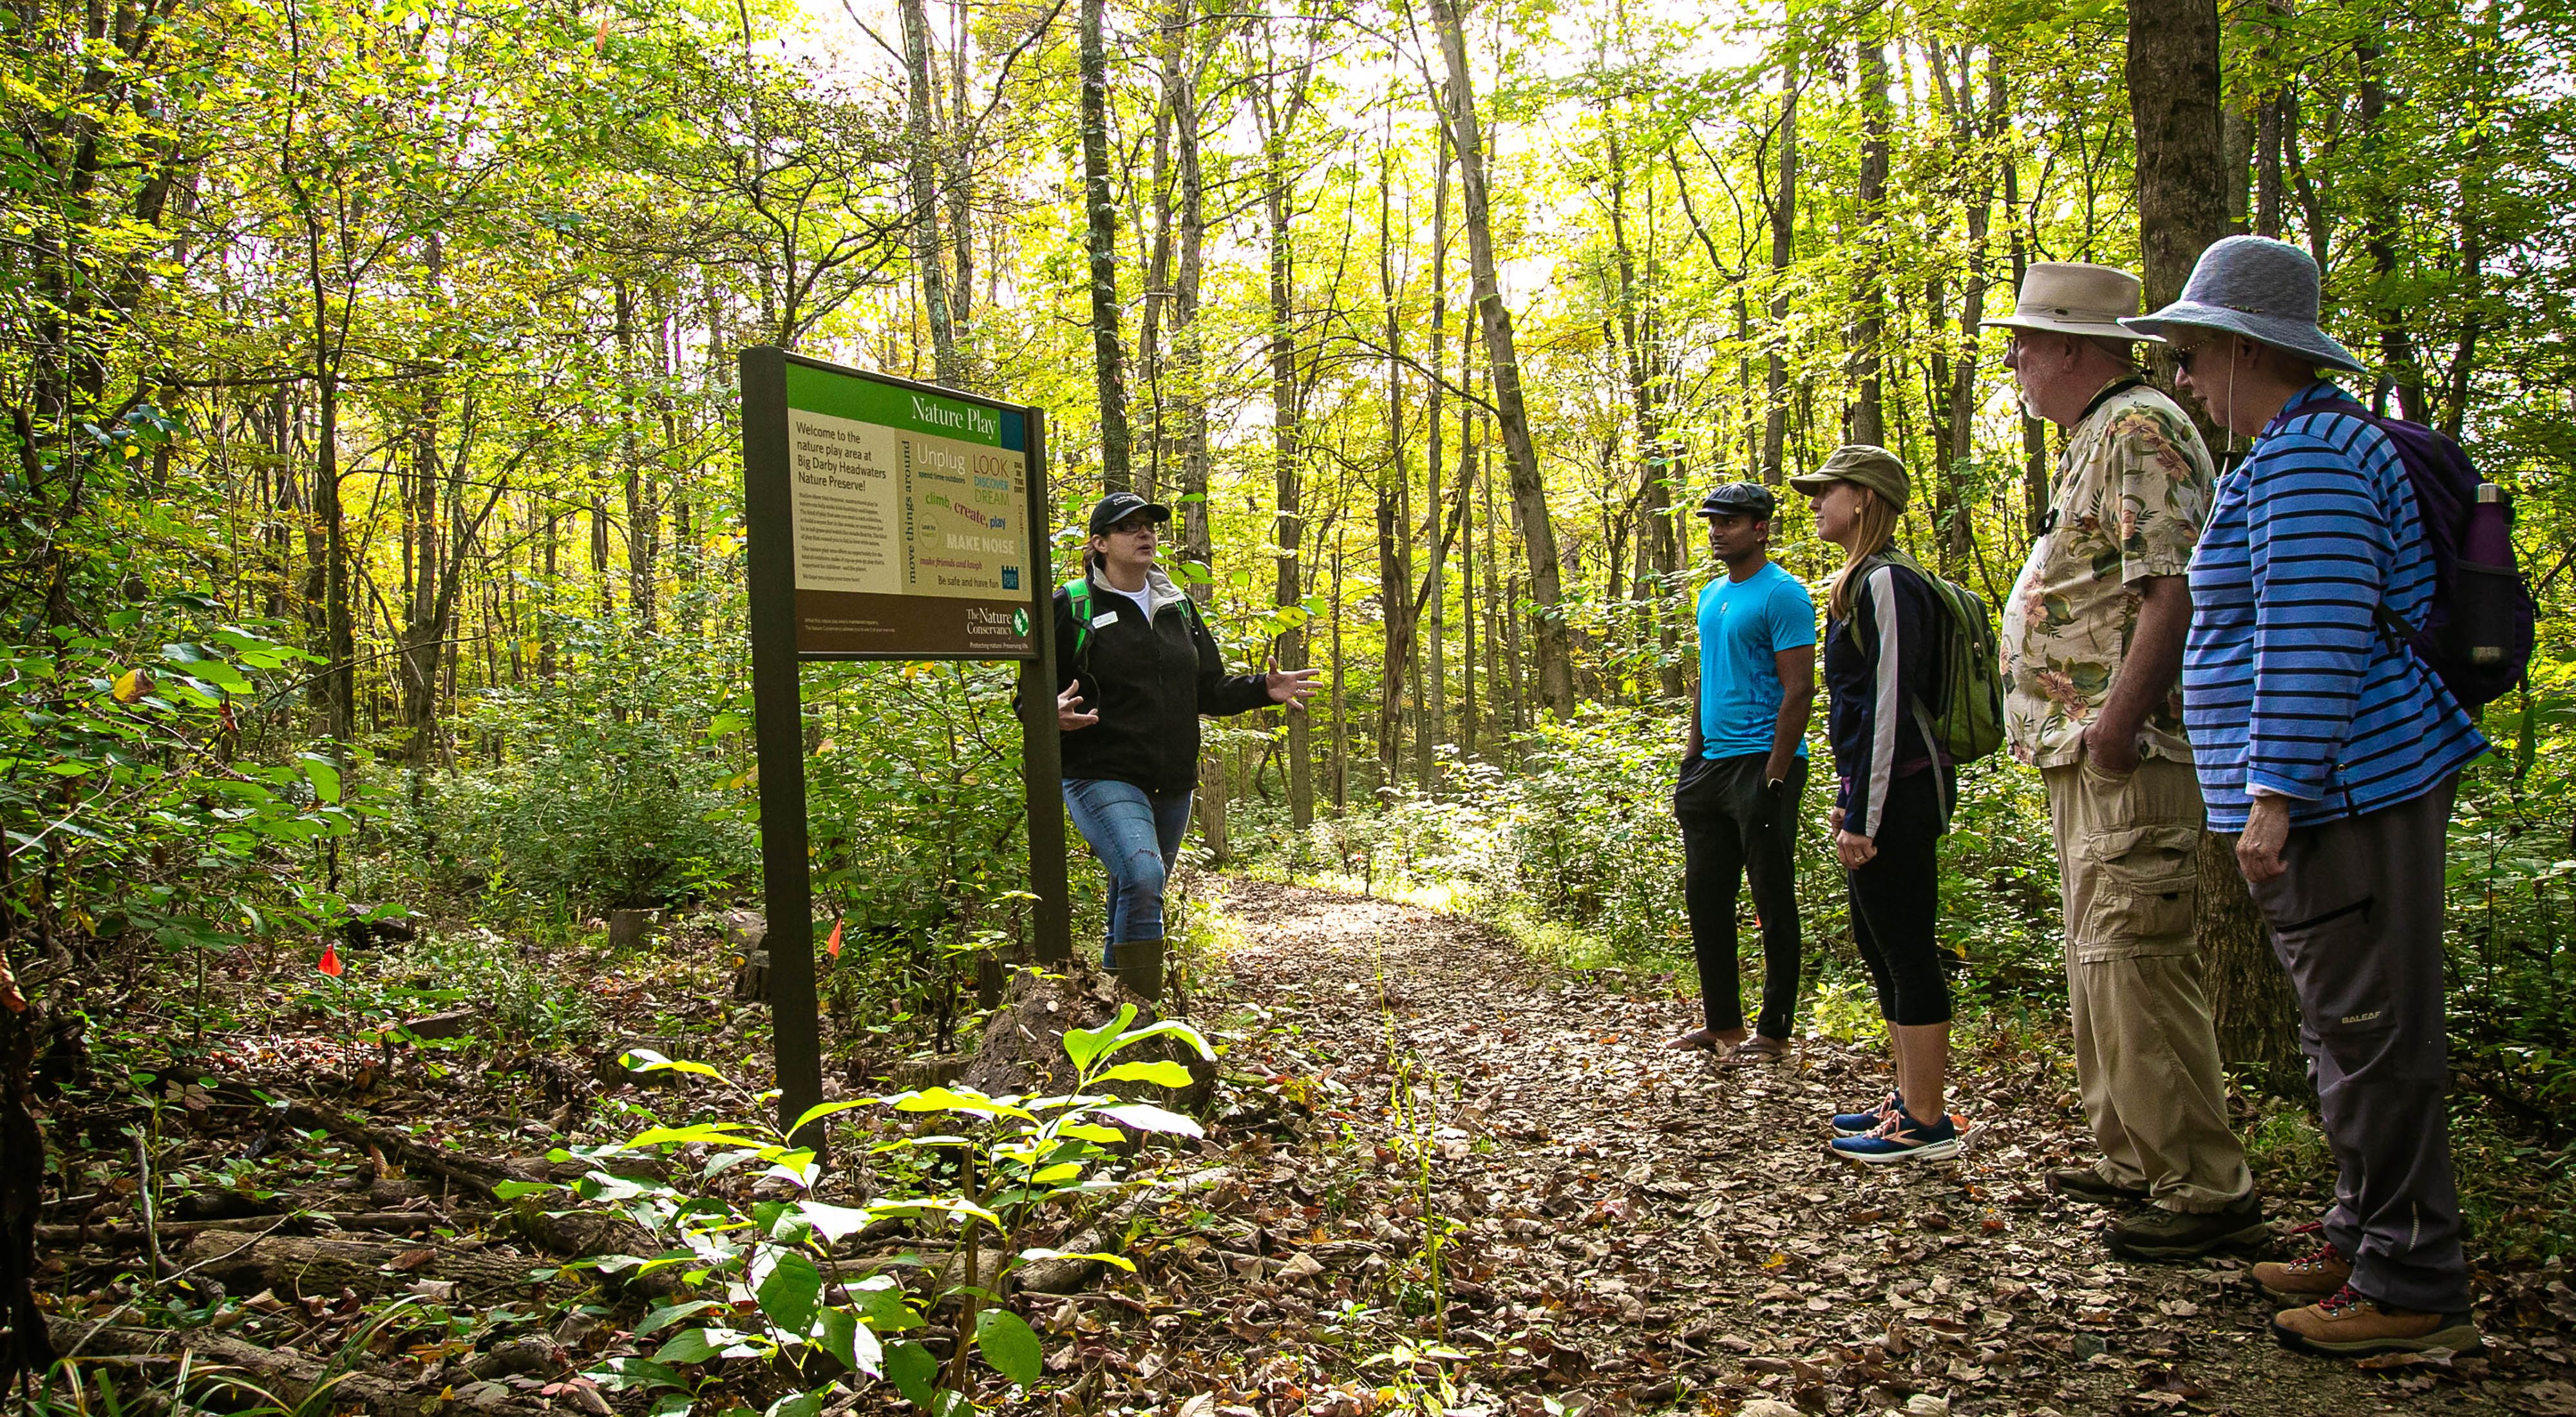 Community and Conservation Specialist Angie Burke talks to hikers in forest at Big Darby Headwaters Preserve.